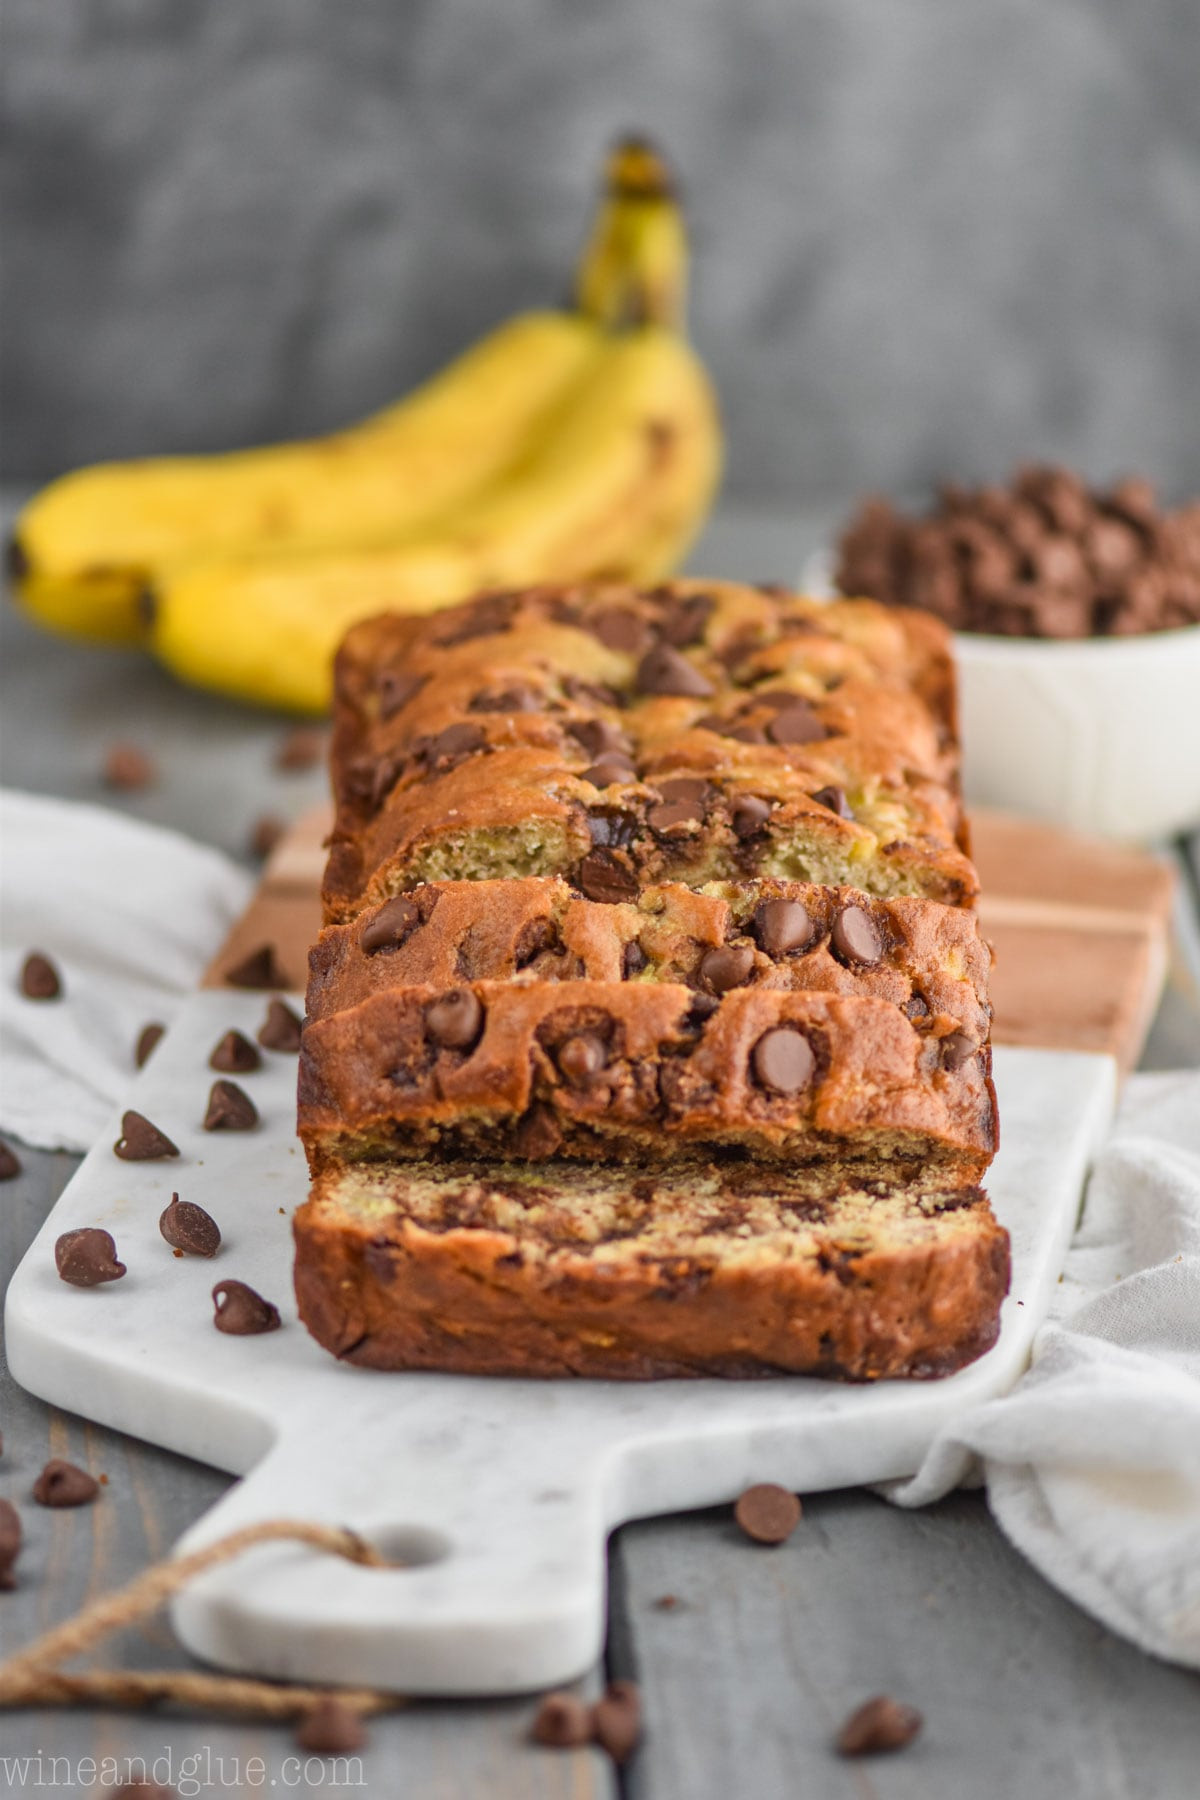 Best Chocolate Chip Banana Bread
 The Best Chocolate Chip Banana Bread Recipe Wine & Glue